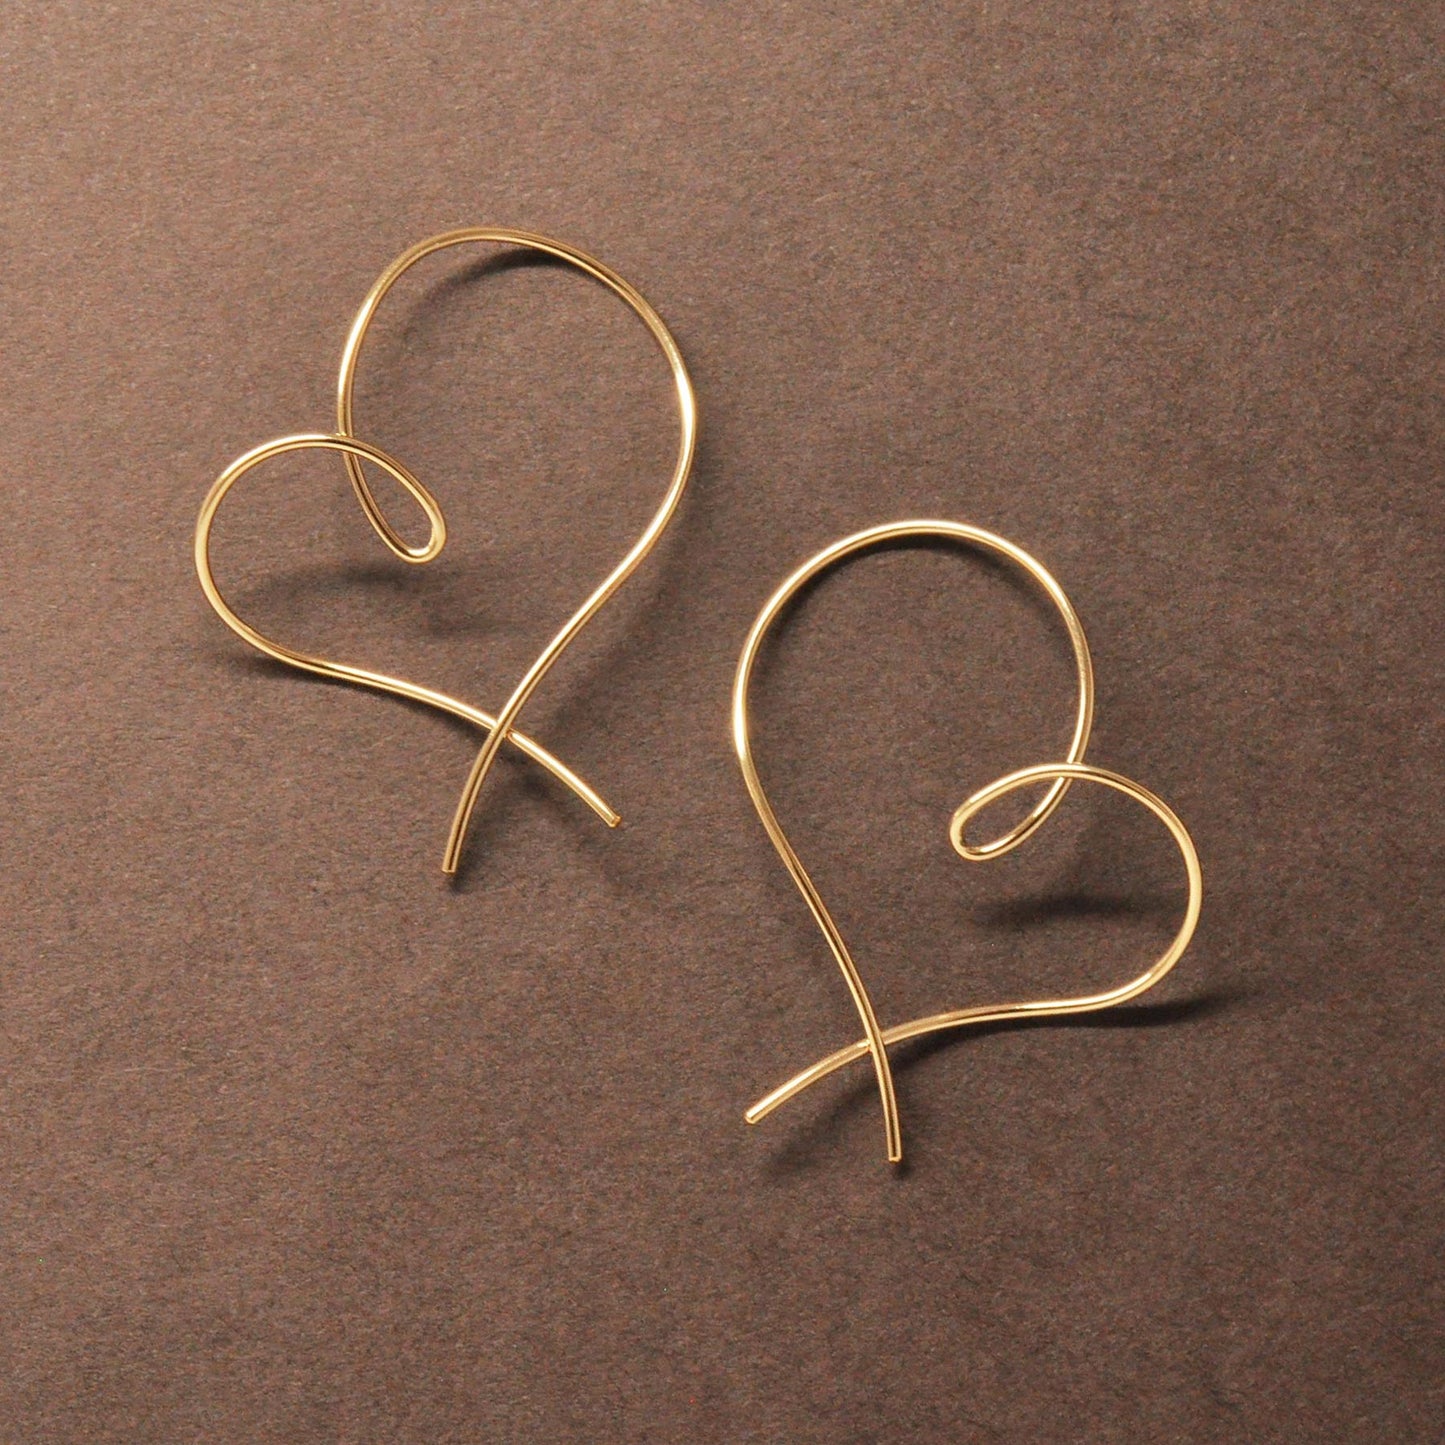 Gold Filled Twisted Heart Earrings - Product Image